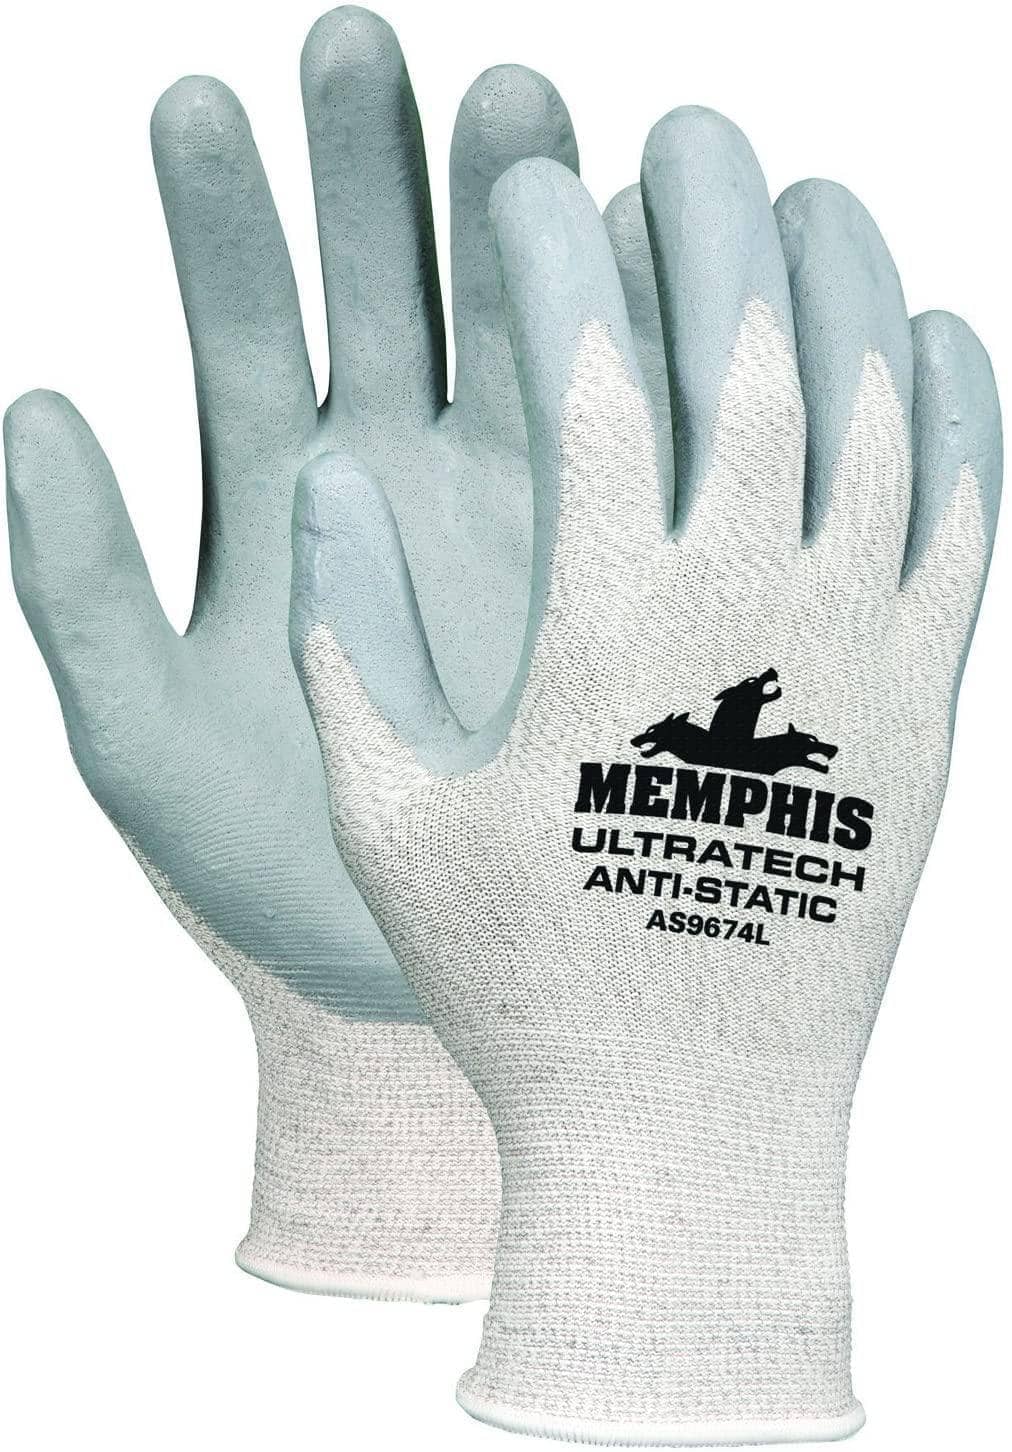 MCR SAFETY - Memphis Glove - ANTI-STATIC, coated palm, knit wrist, Nitrile - Becker Safety and Supply